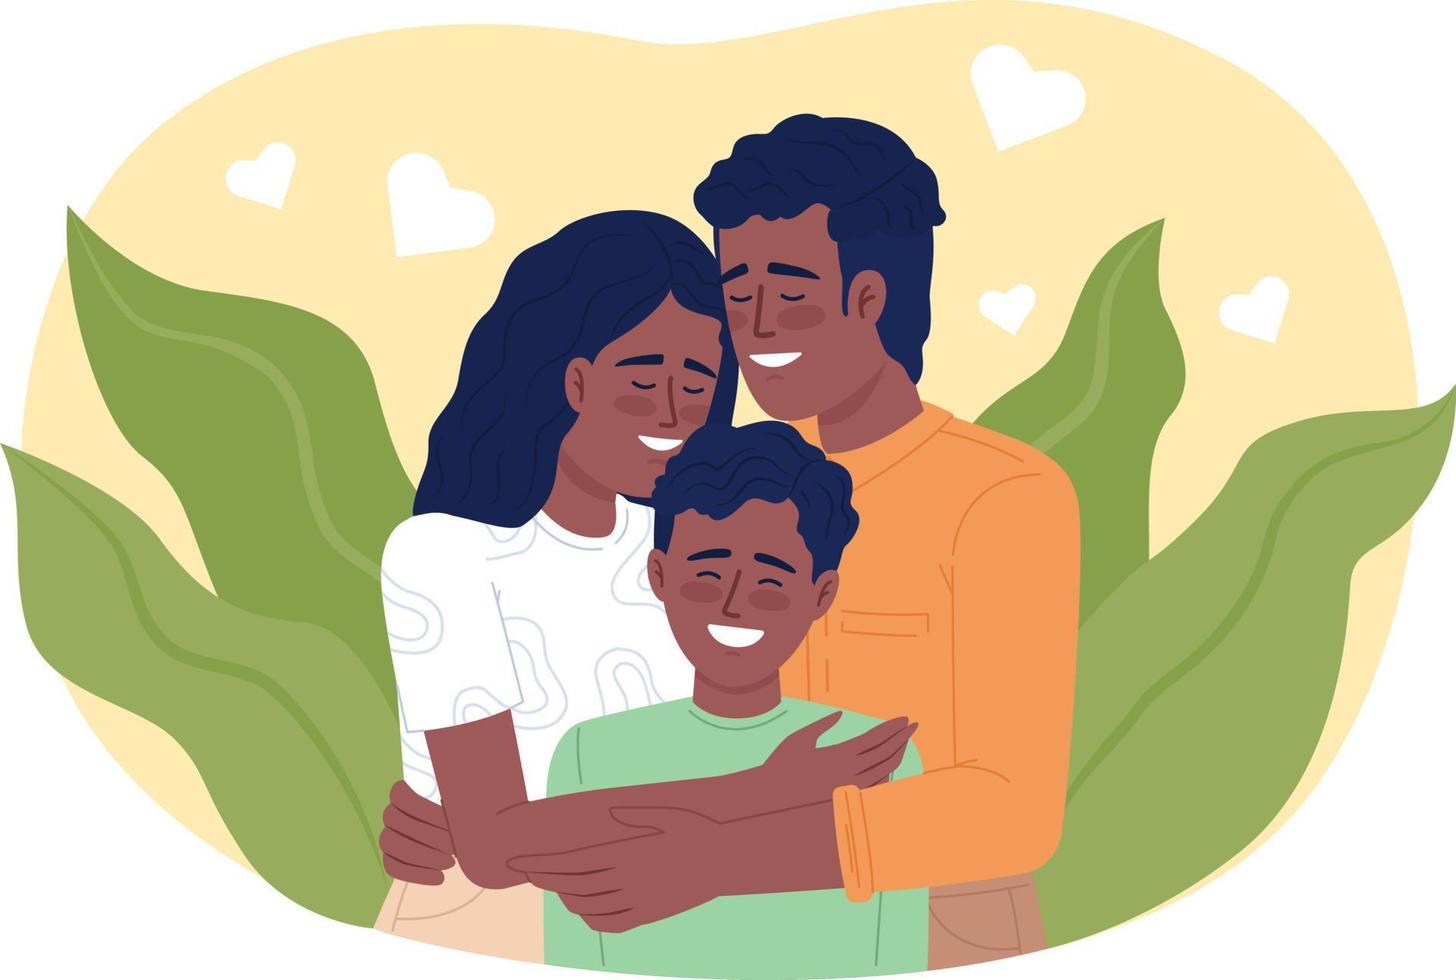 Parents bonding with child 2D vector isolated illustration. Happy mom and dad cuddling son flat characters on cartoon background. Colorful editable scene for mobile, website, presentation